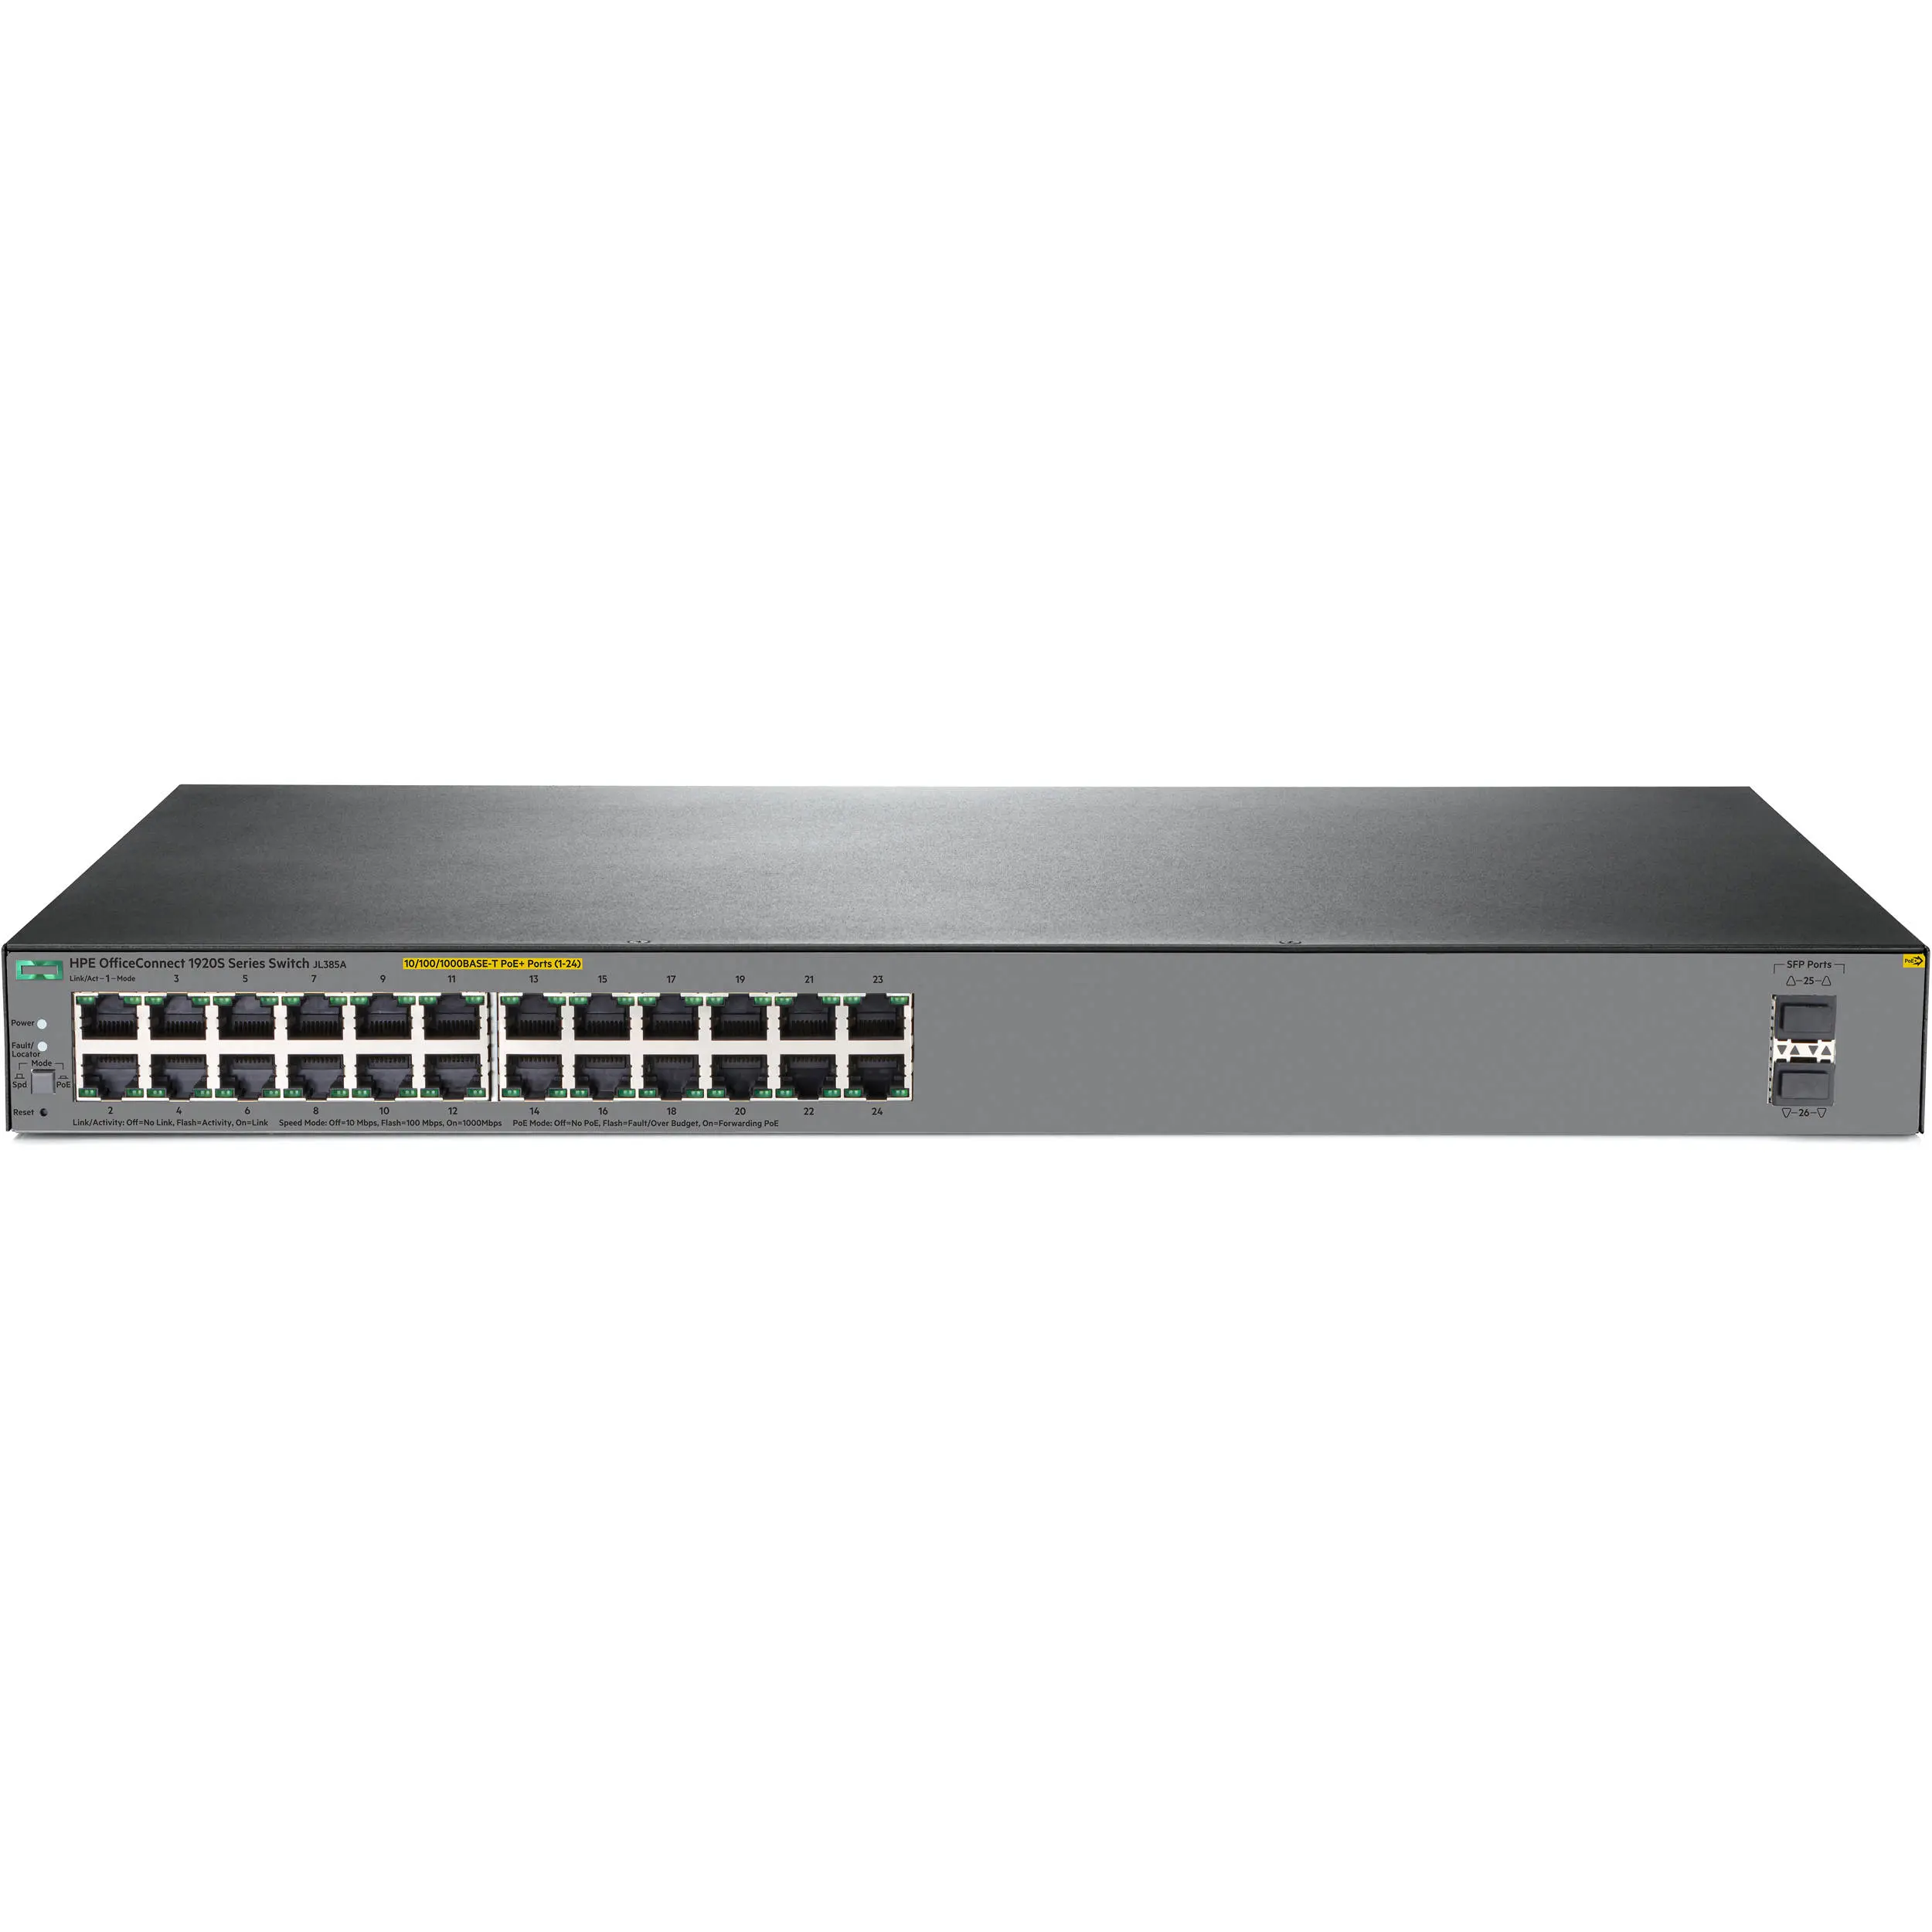 hewlett packard enterprise hpe officeconnect 1920s 24g 2sfp - What is the default username and password for HP switch